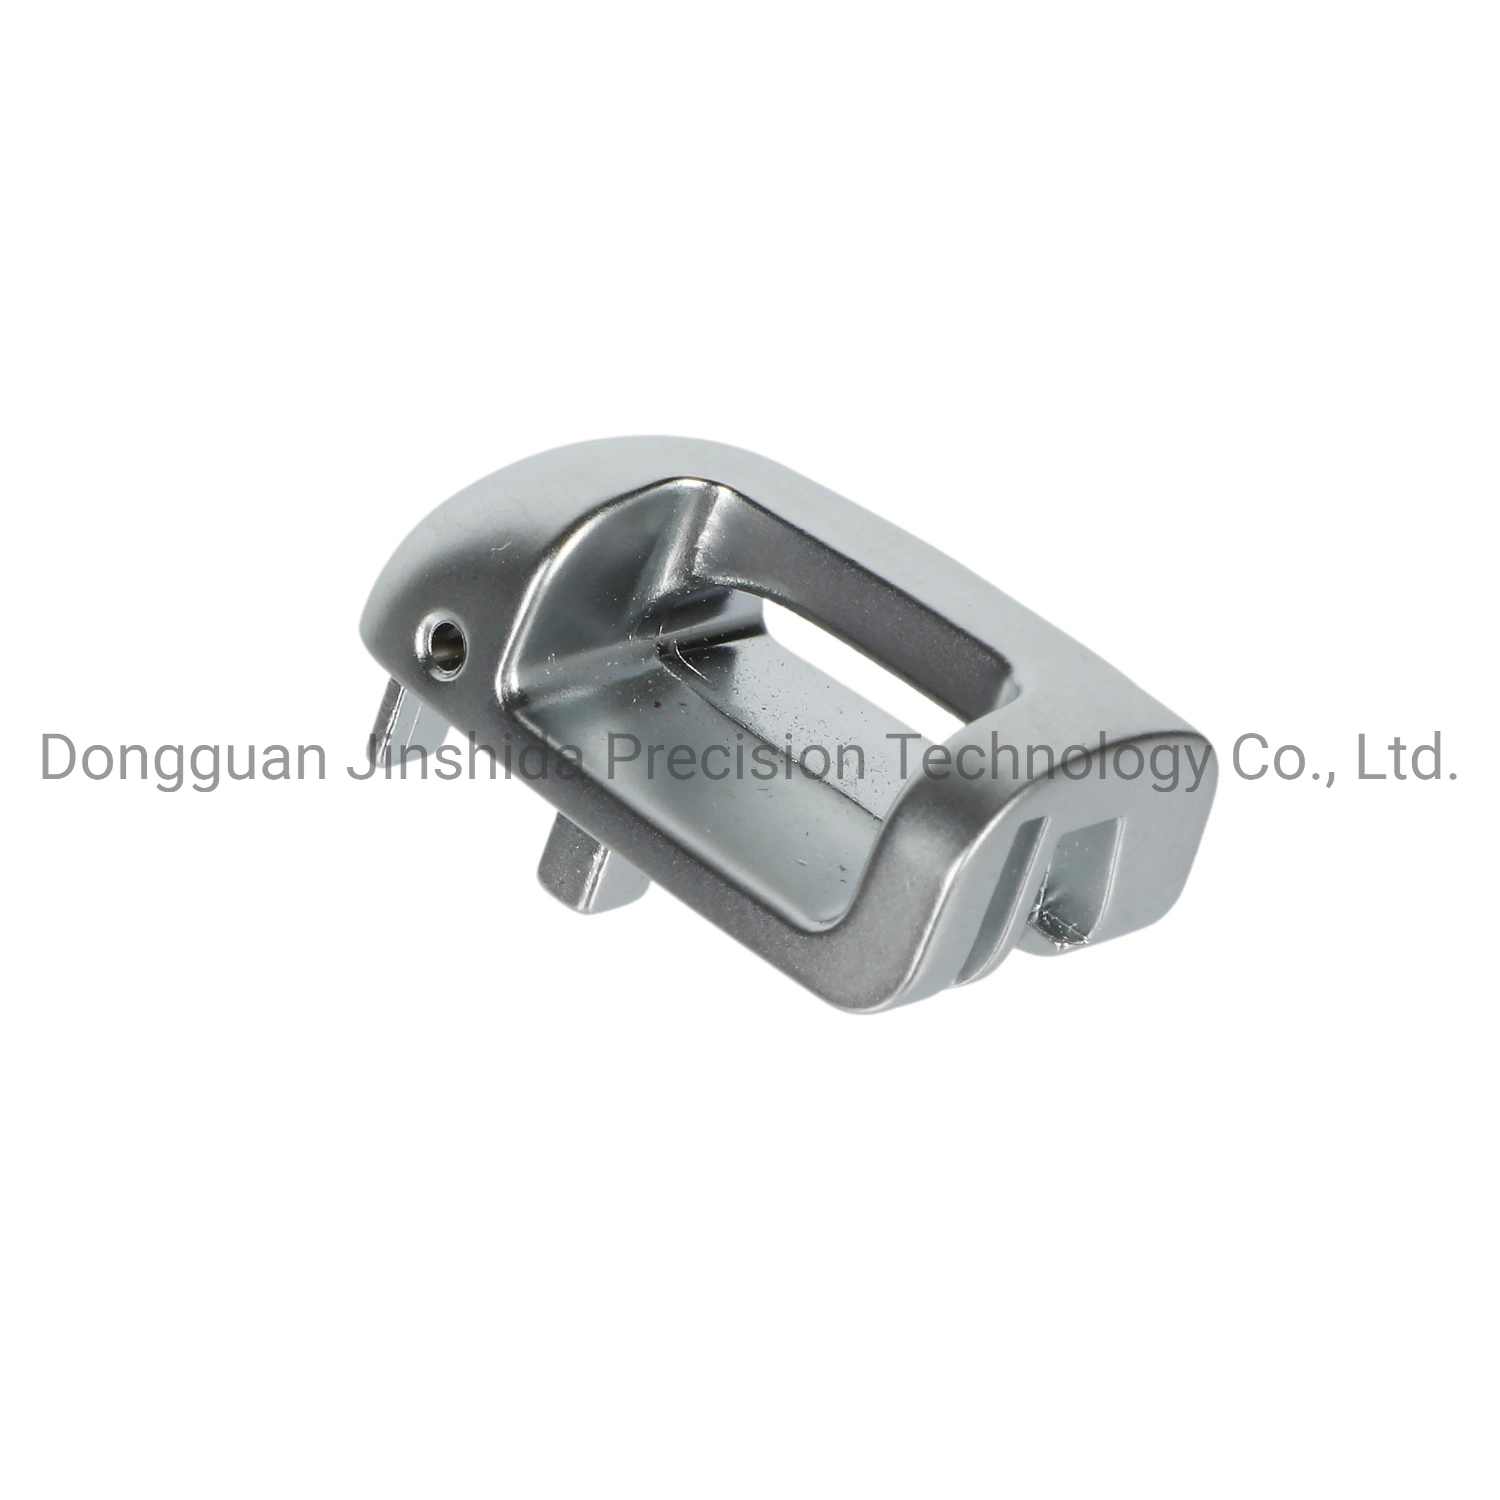 OEM/ODM Die Casting Automobile Key Body Parts Controller Part Remote Control Key Metal Fittings